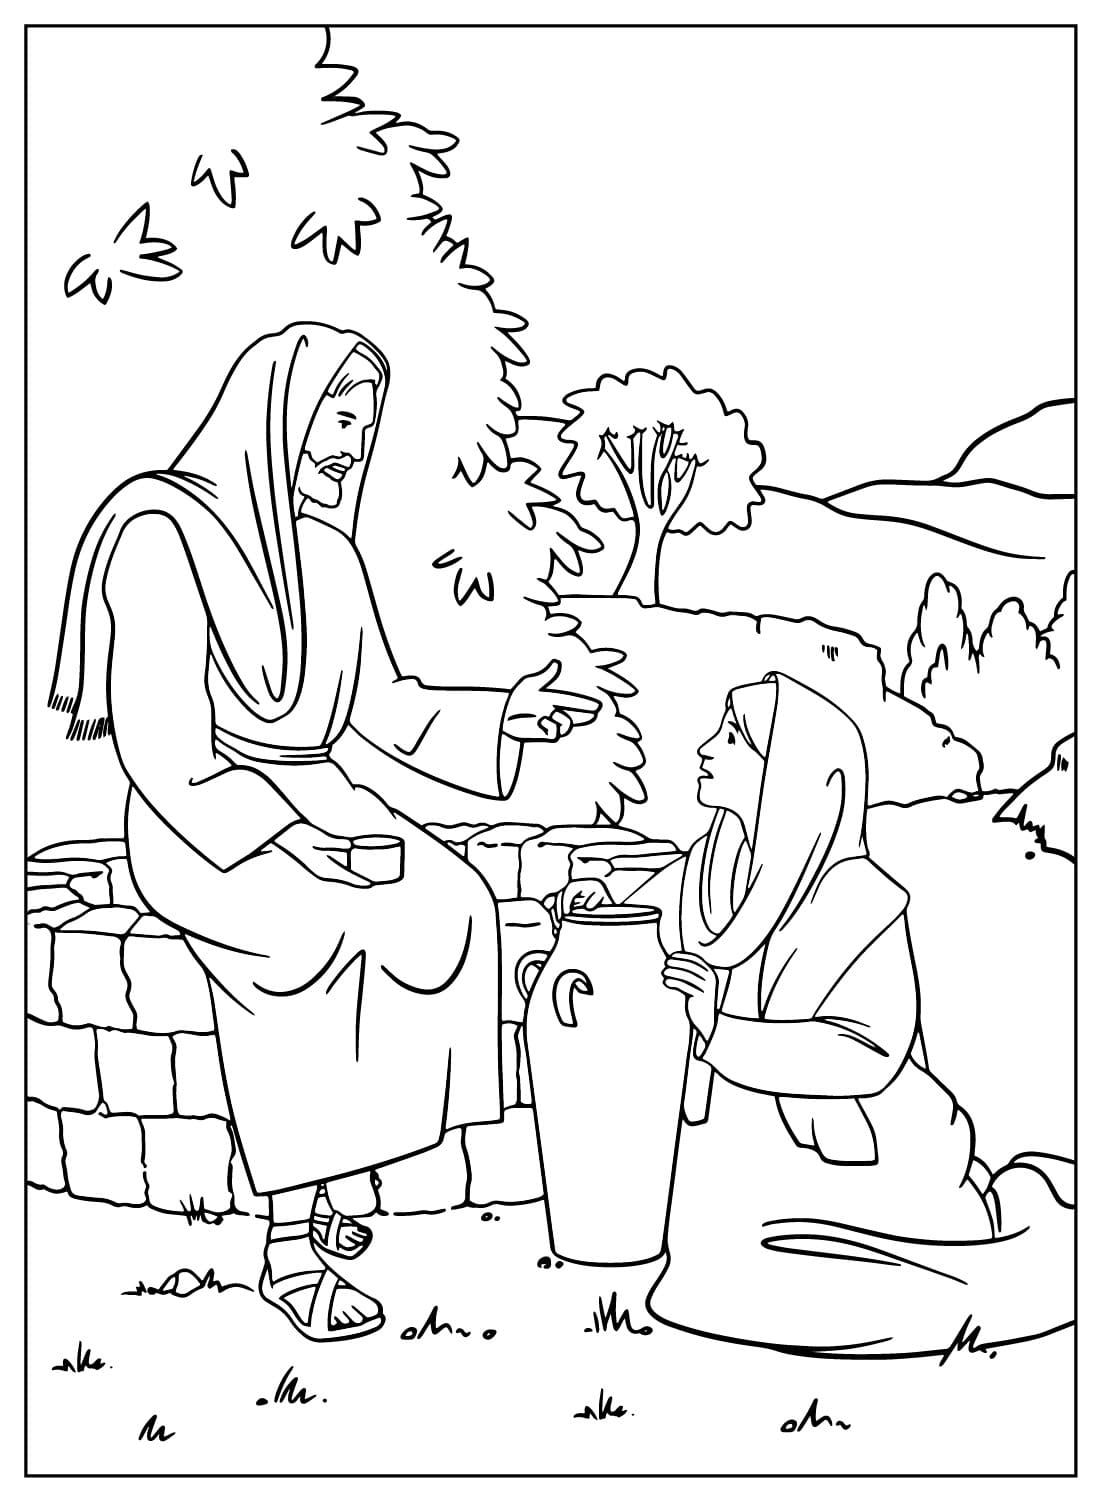 Jesus Asked the Samaritan Woman for a Drink of Water from Jesus